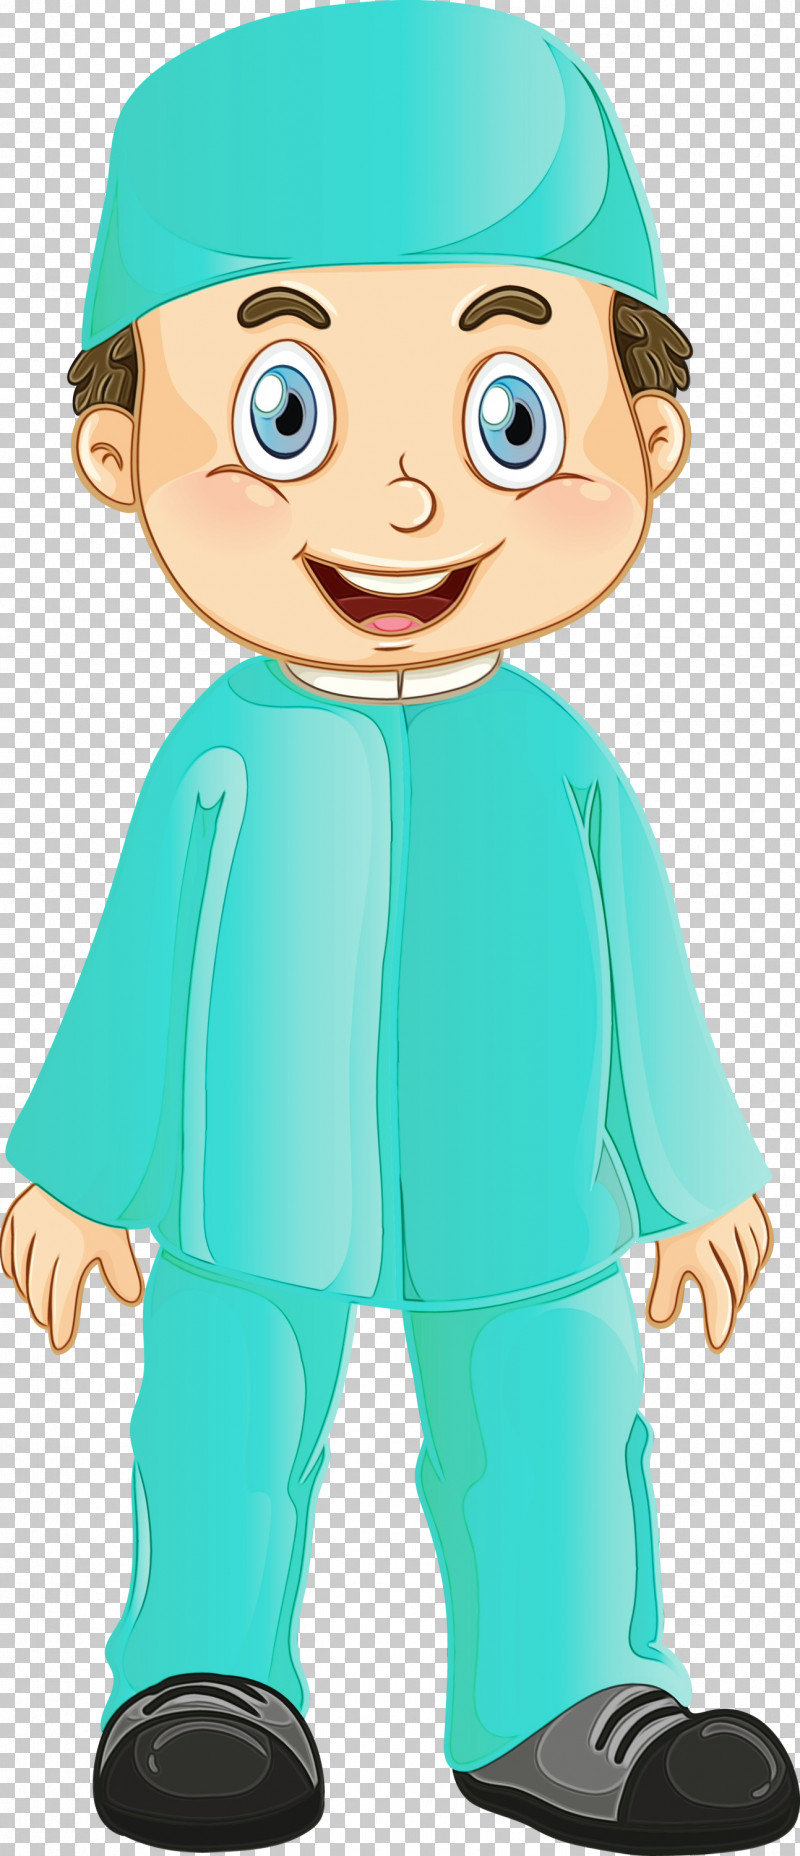 Cartoon Child Toddler Smile Gesture PNG, Clipart, Cartoon, Child, Costume, Gesture, Muslim People Free PNG Download